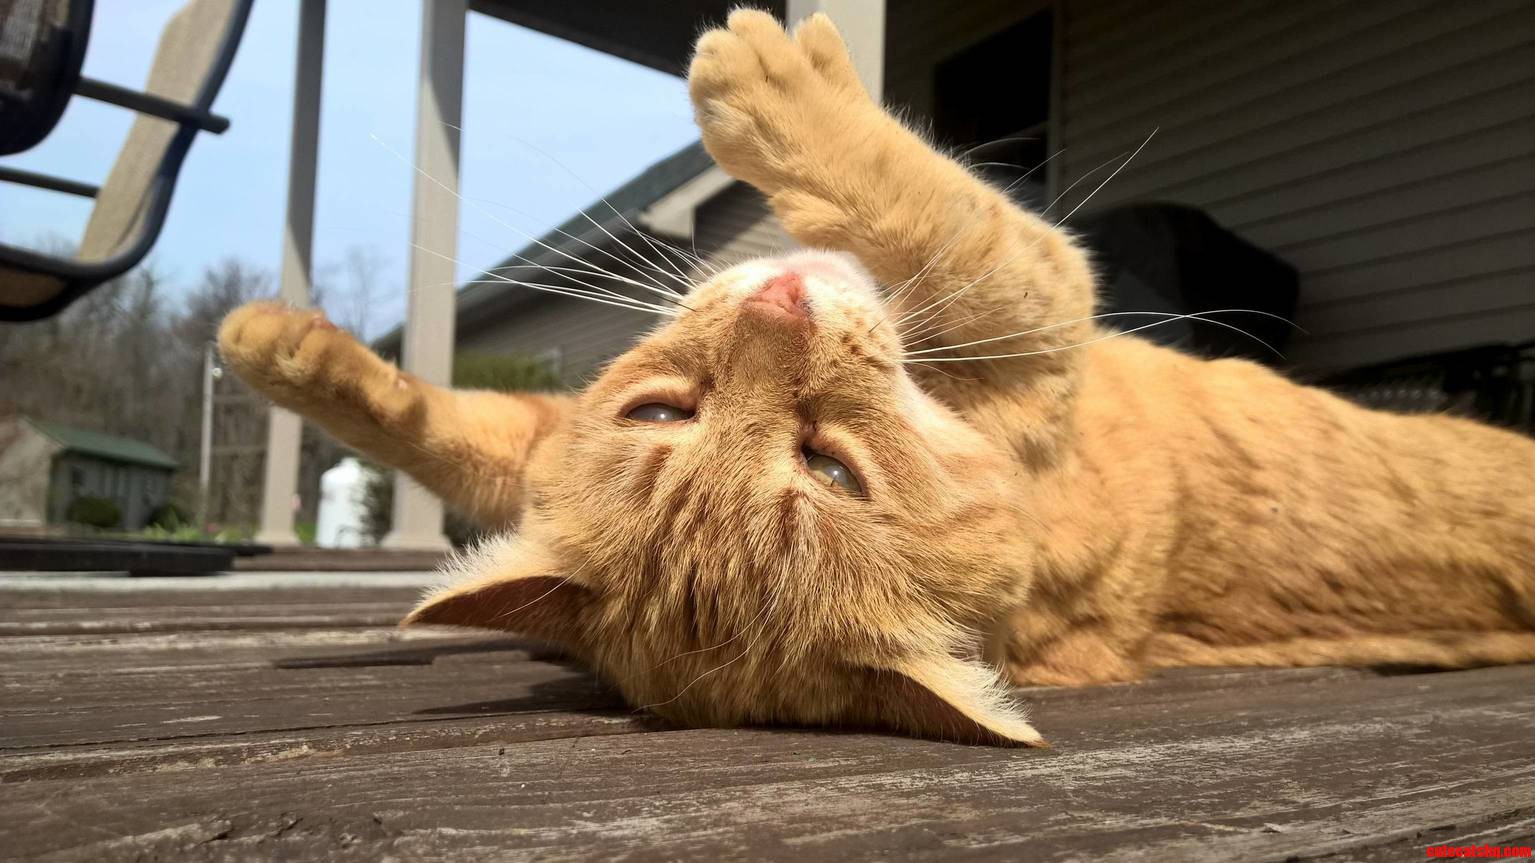 He spends his days rolling around on the porch.